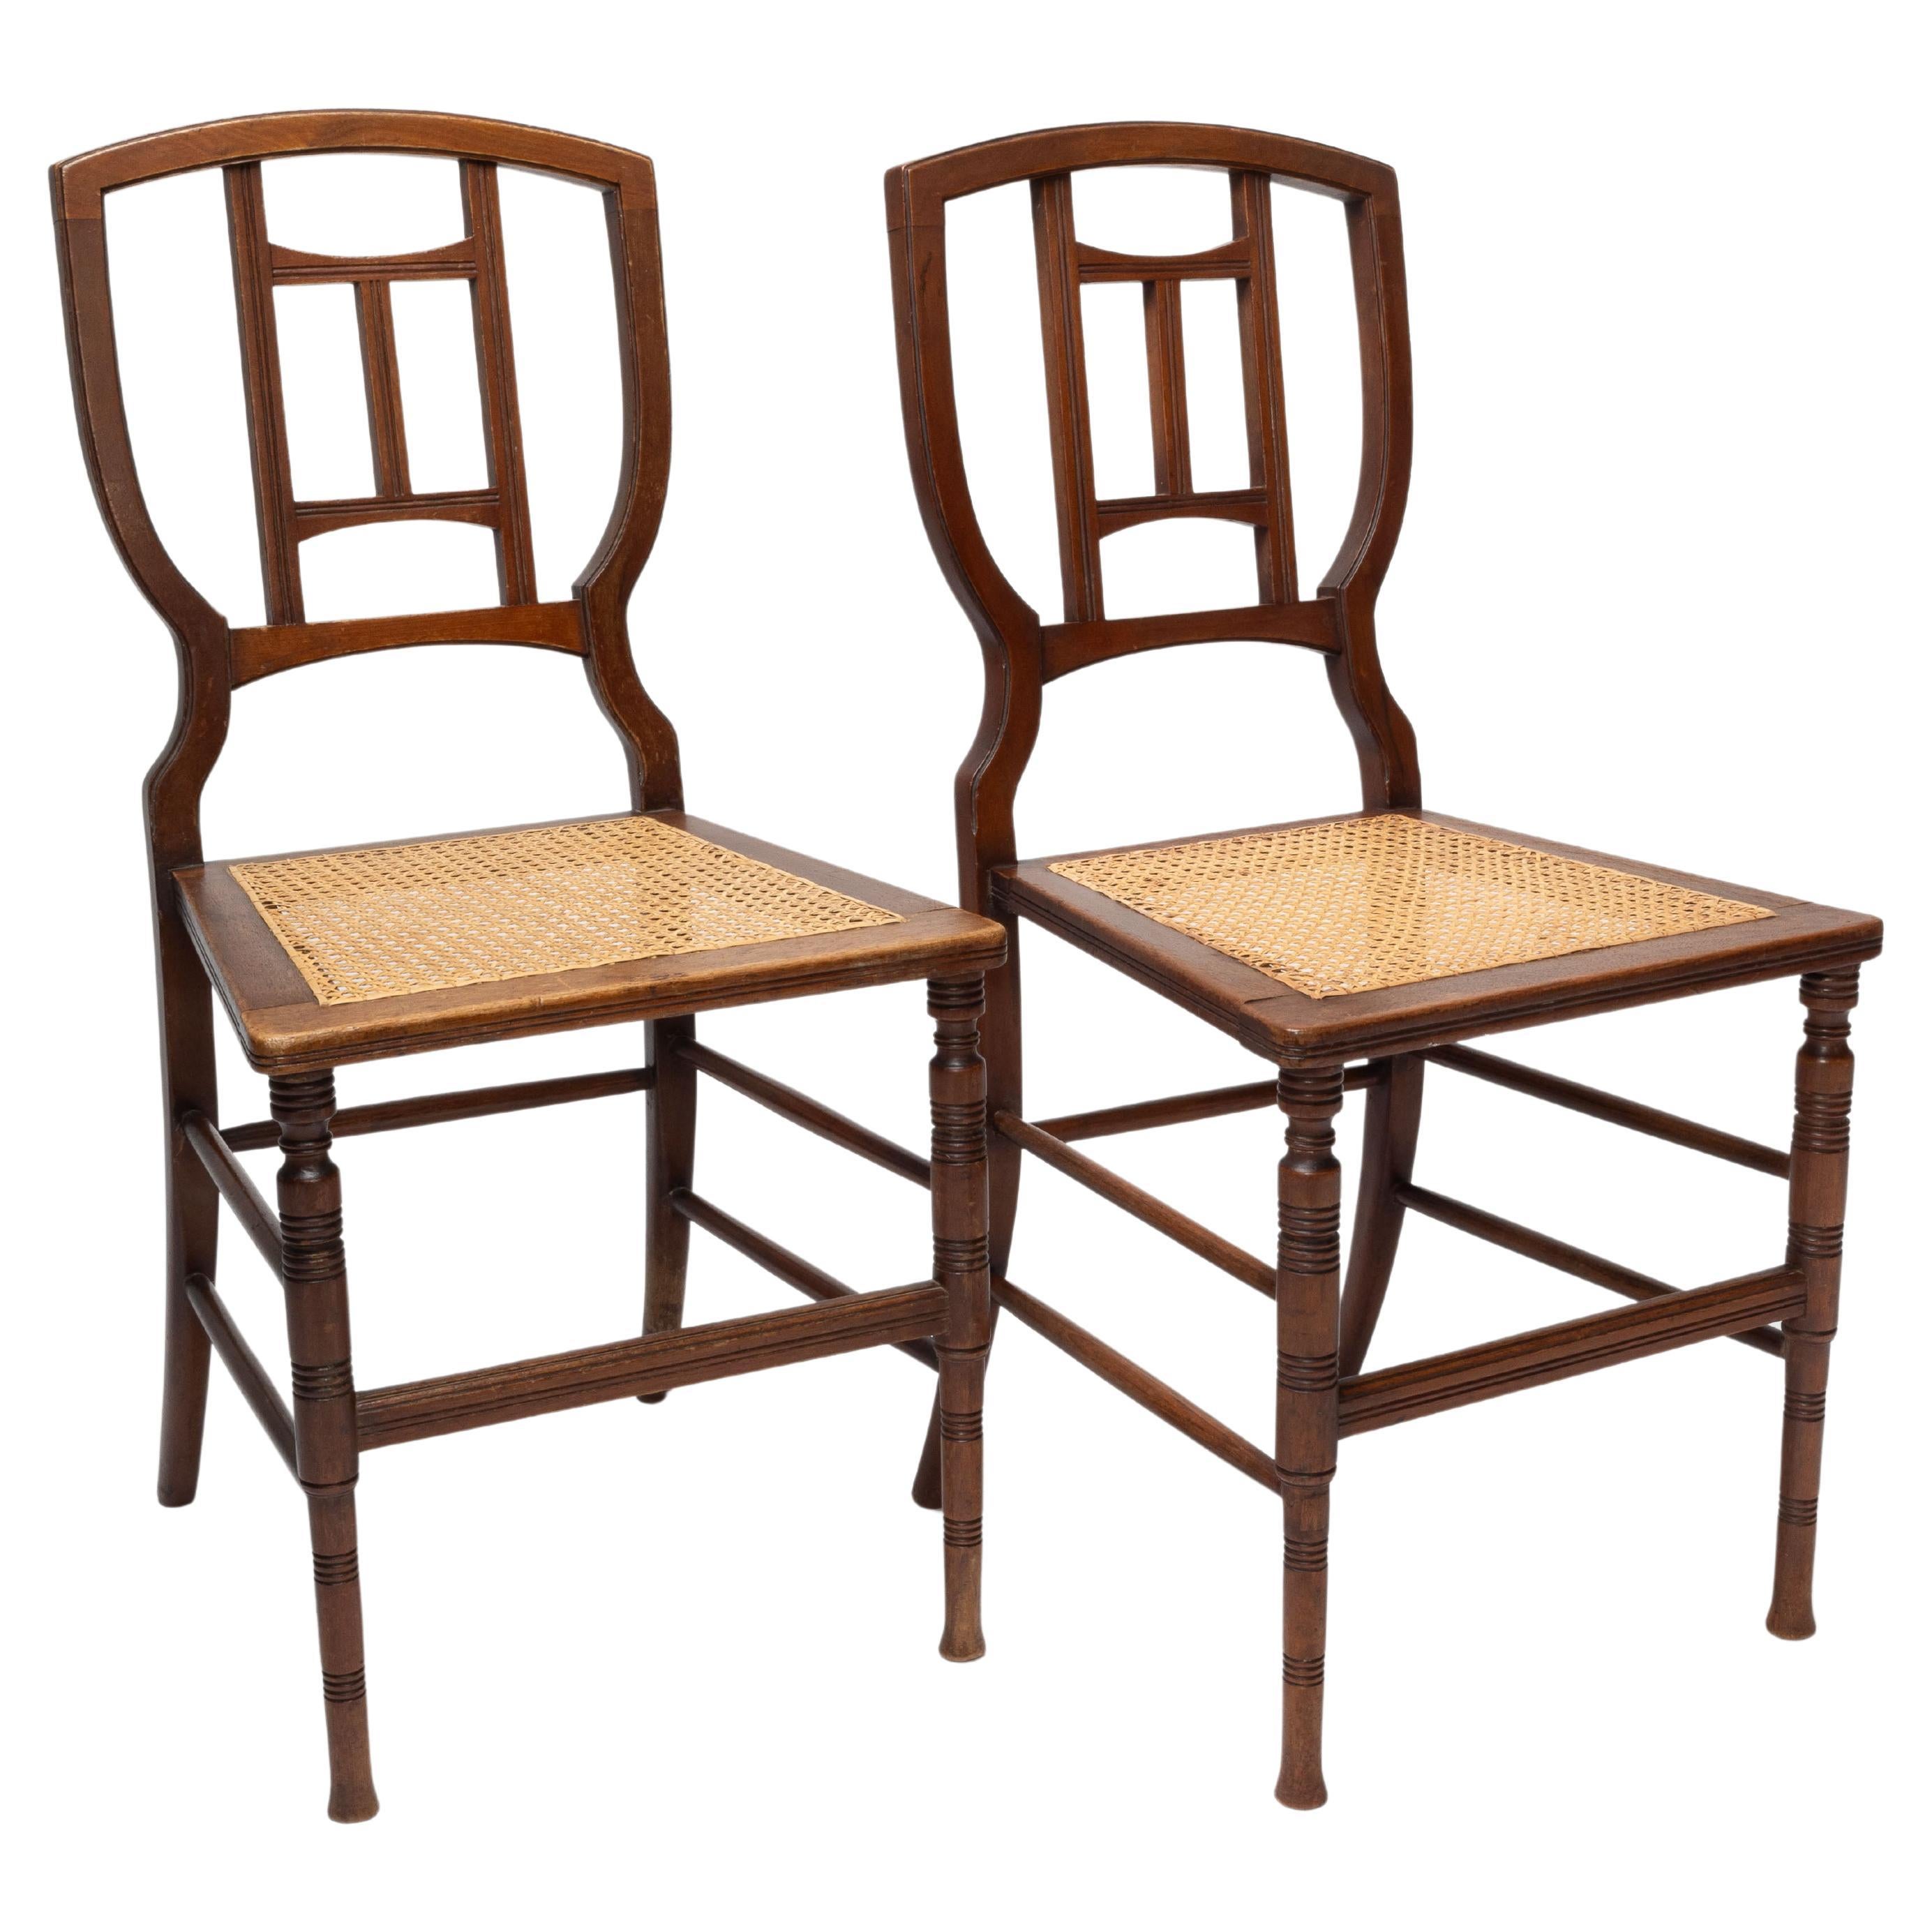 H W Batley attr. Jas Shoolbred Pair of Aesthetic Movement cane seat beech chairs